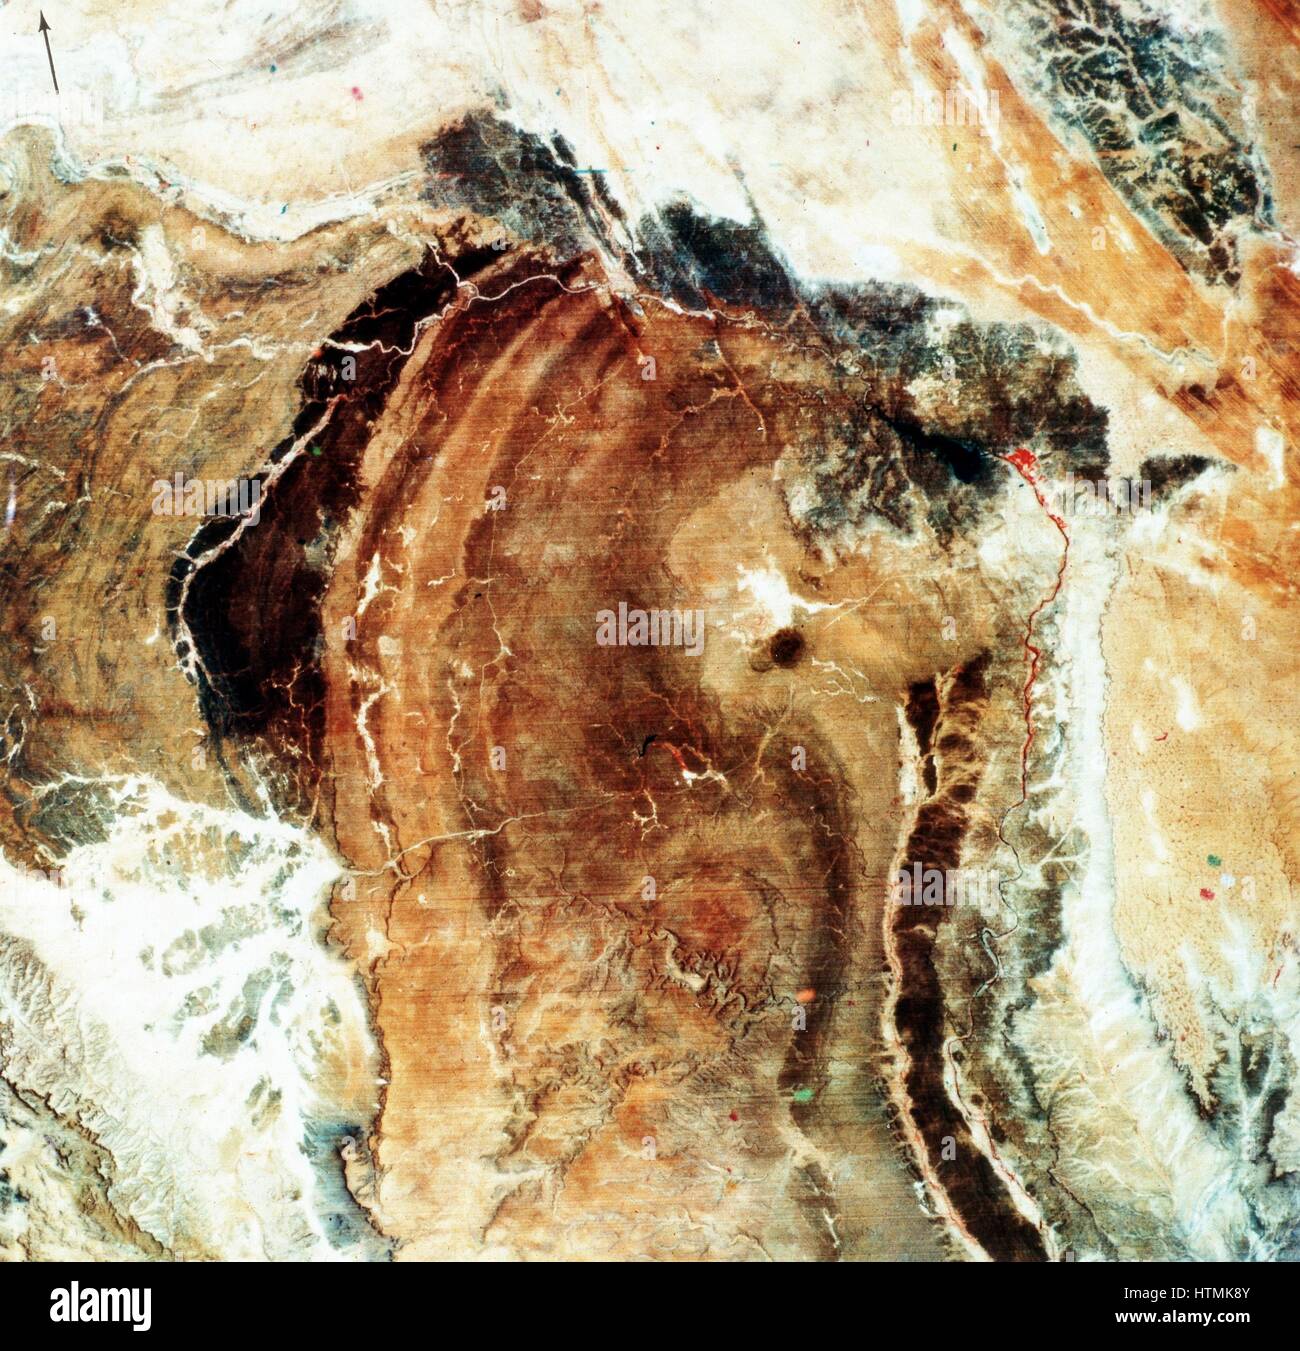 Multispectral scanner reveals lithologic and structural features of Great Namaland in Namibia with clarity. Area extremely dry with little vegetation, so geology dominates image. Photographed from Landsat-1 19 December 1972. NASA photograph. Stock Photo